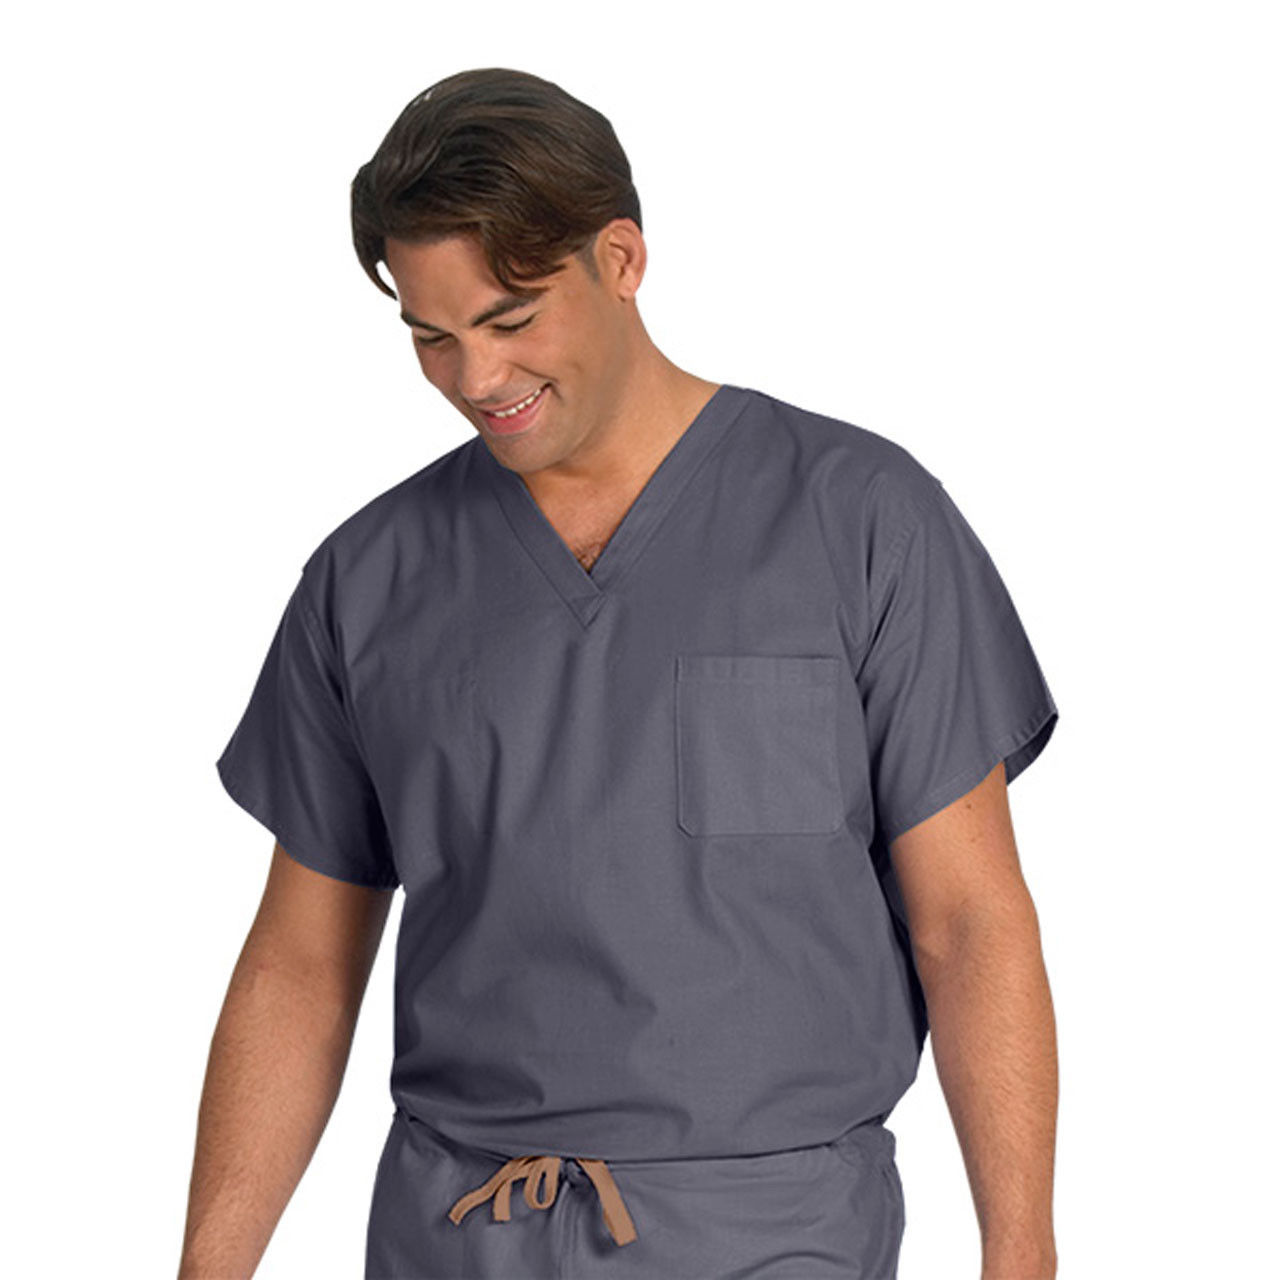 What are the dignity health scrub colors and where is the pocket located?